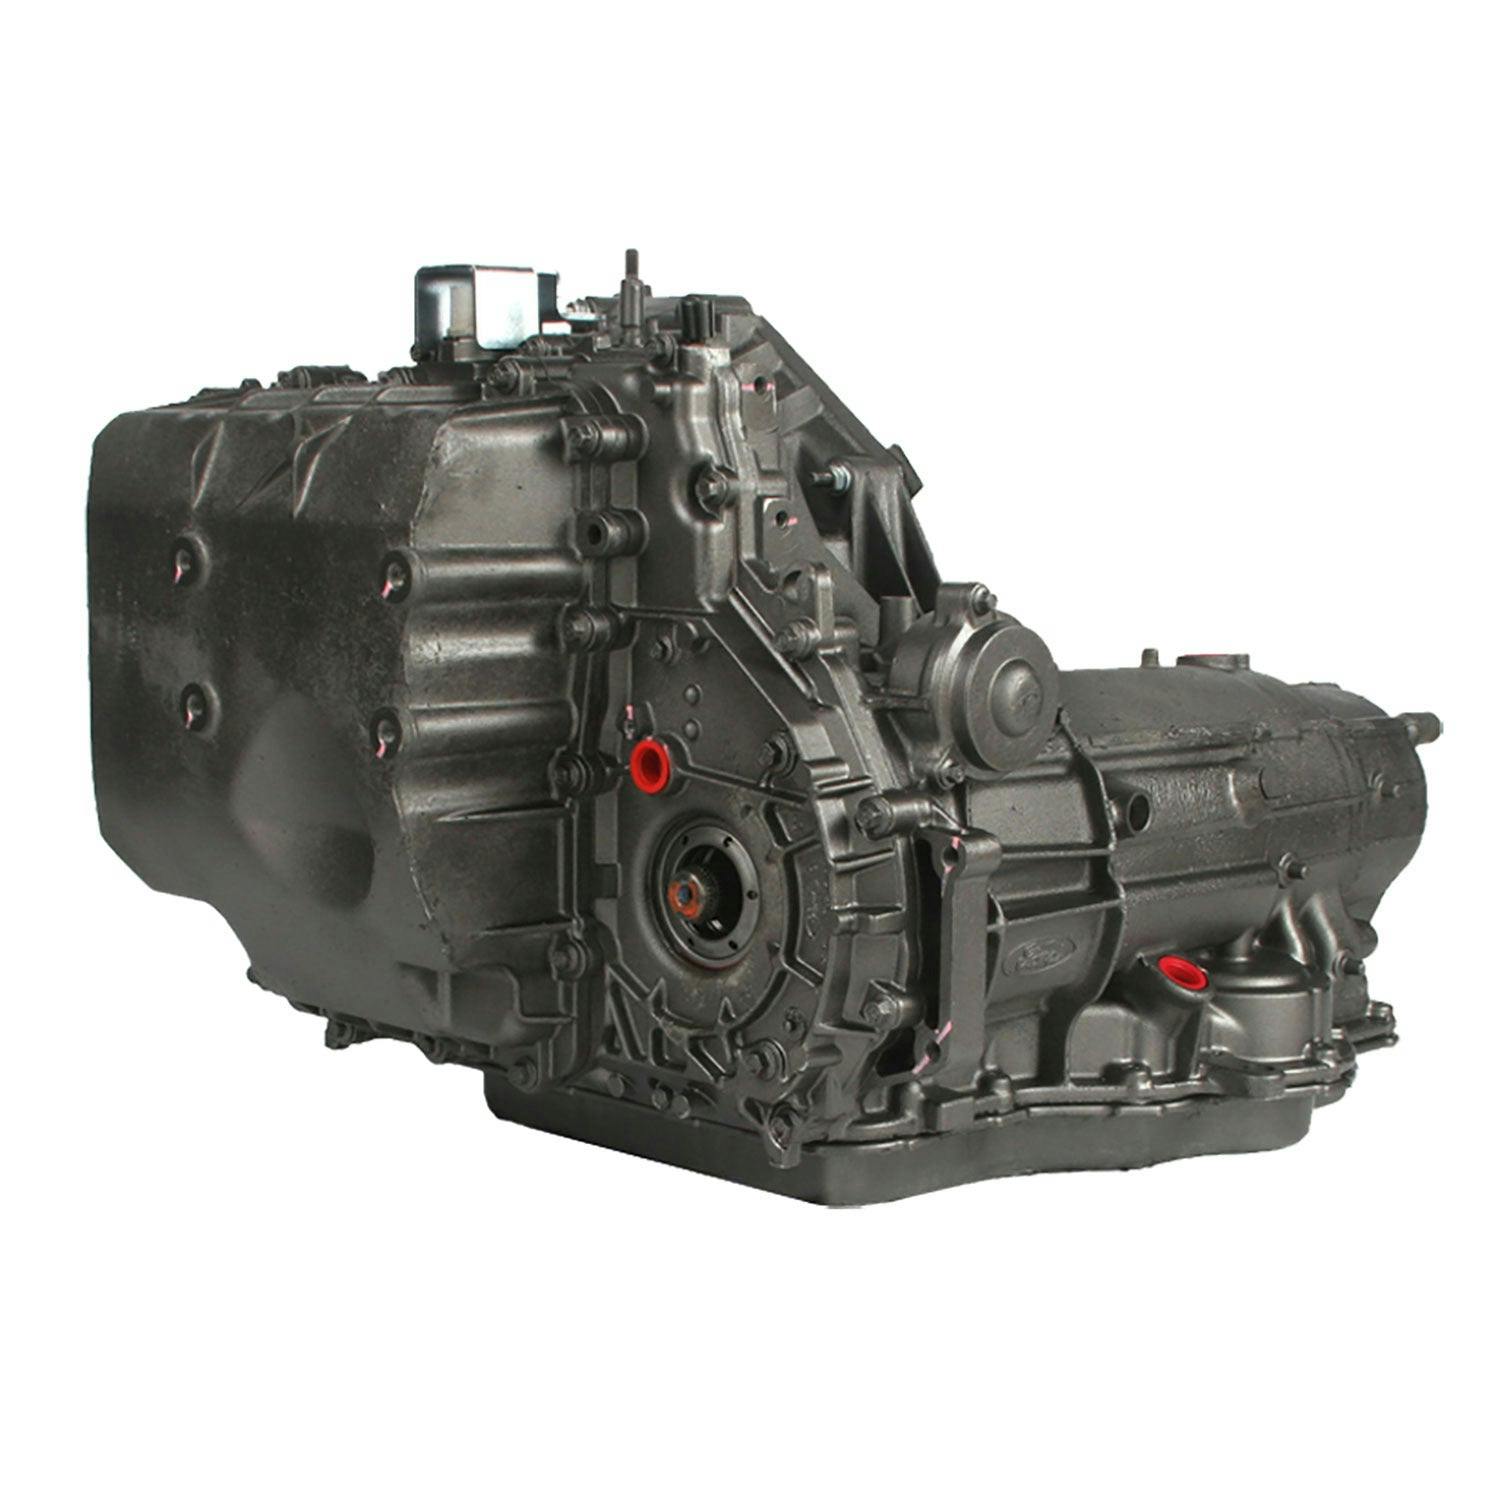 Automatic Transmission for 2004-2005 Ford Taurus/Mercury Sable FWD with 3L V6 Engine